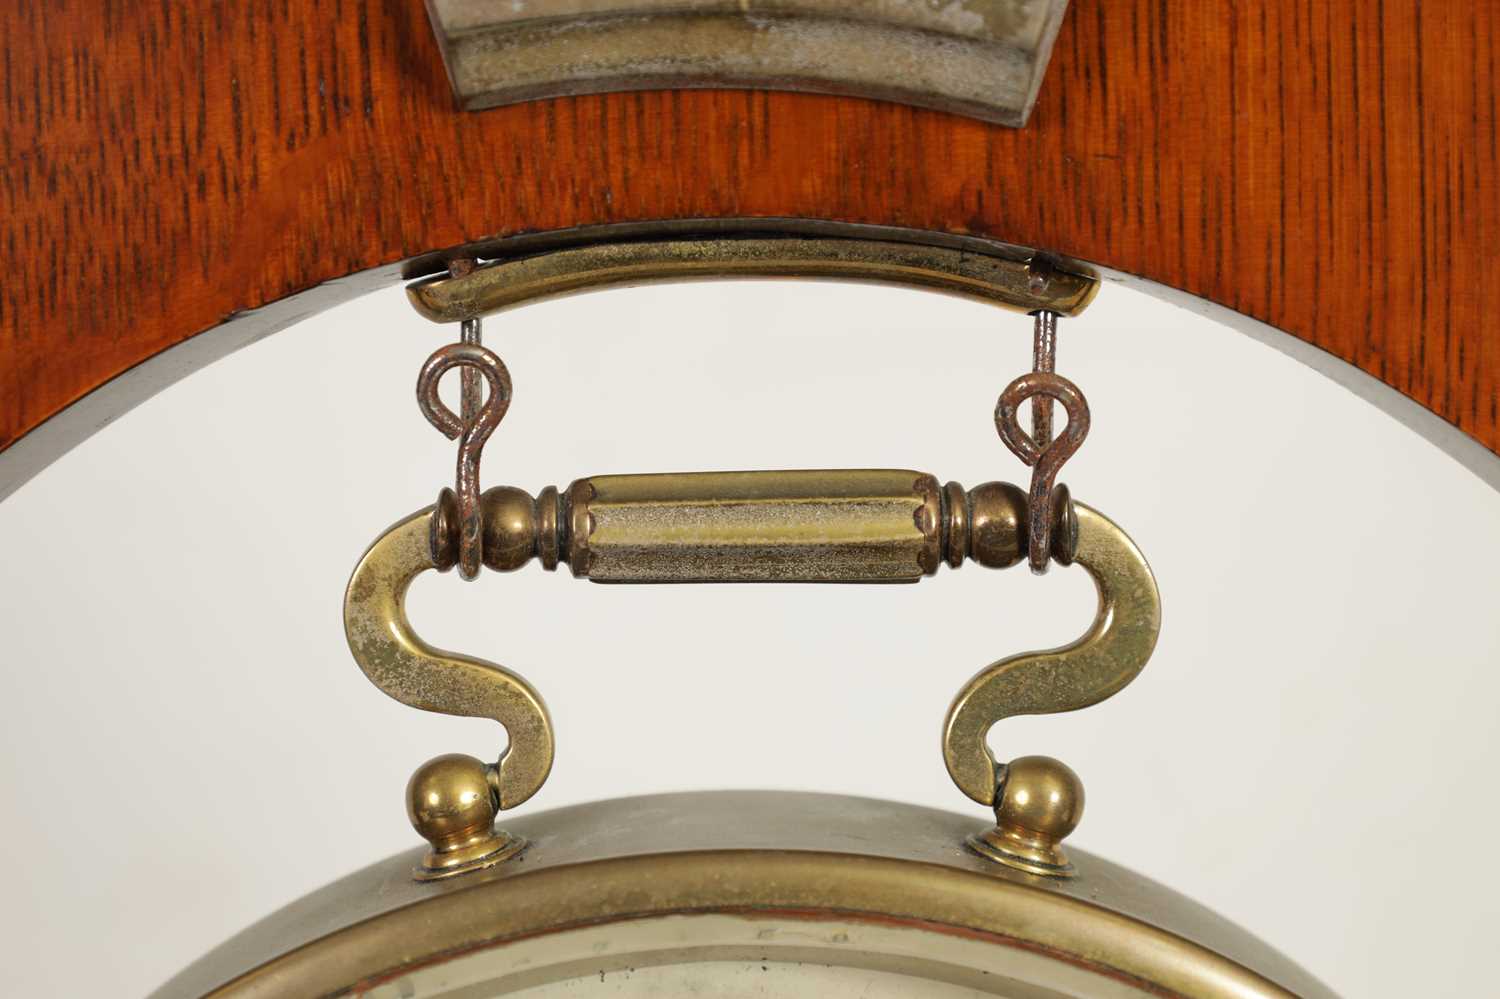 AN UNUSUAL LATE 19TH CENTURY BAROMETER OF EQUESTRIAN INTEREST - Image 5 of 12